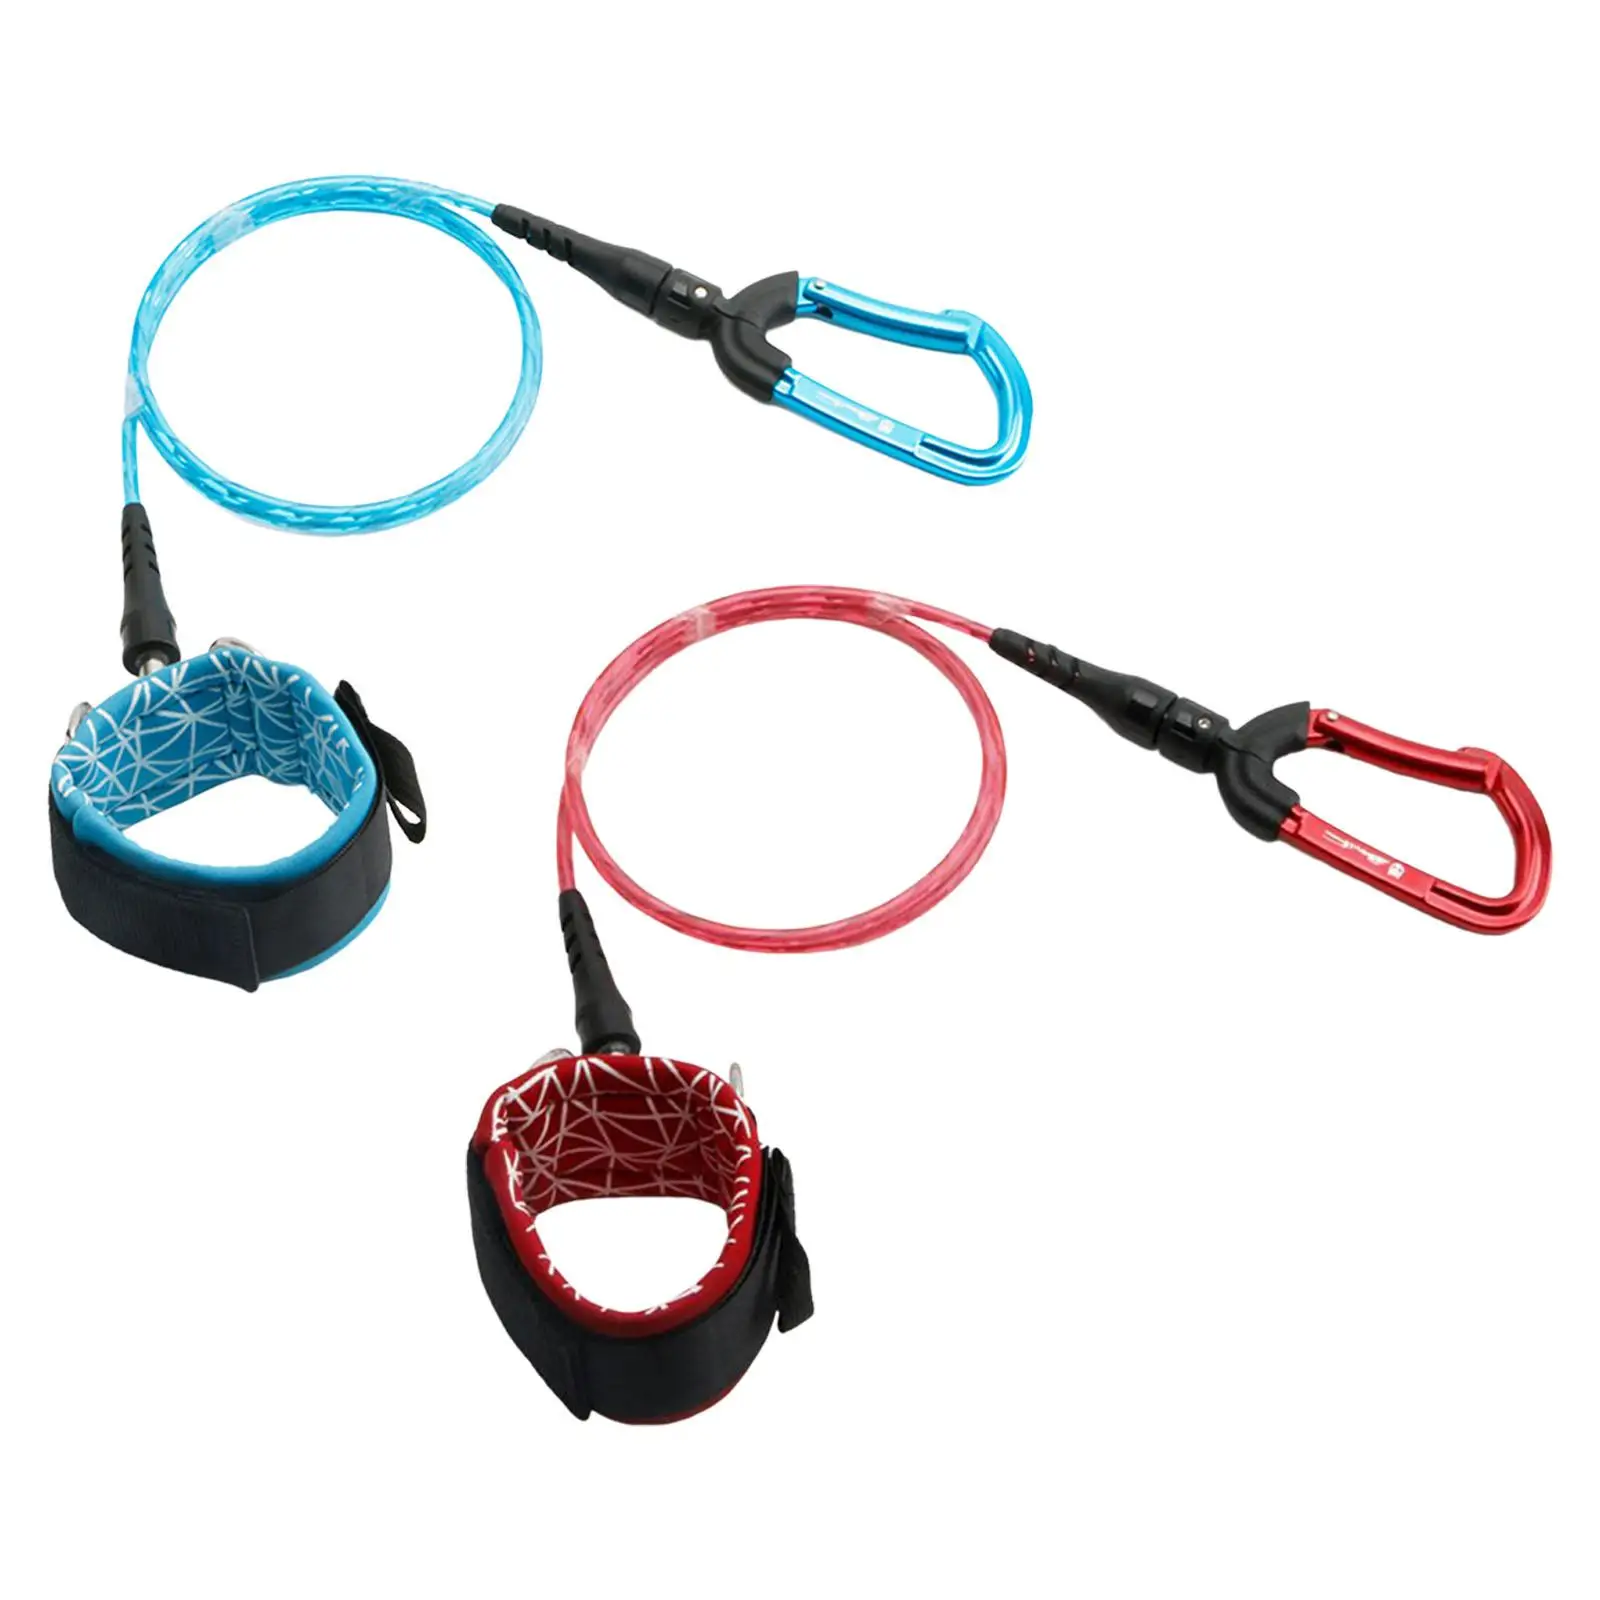 Freediving Lanyard with Adjustable Safety Rope for Drift Diving